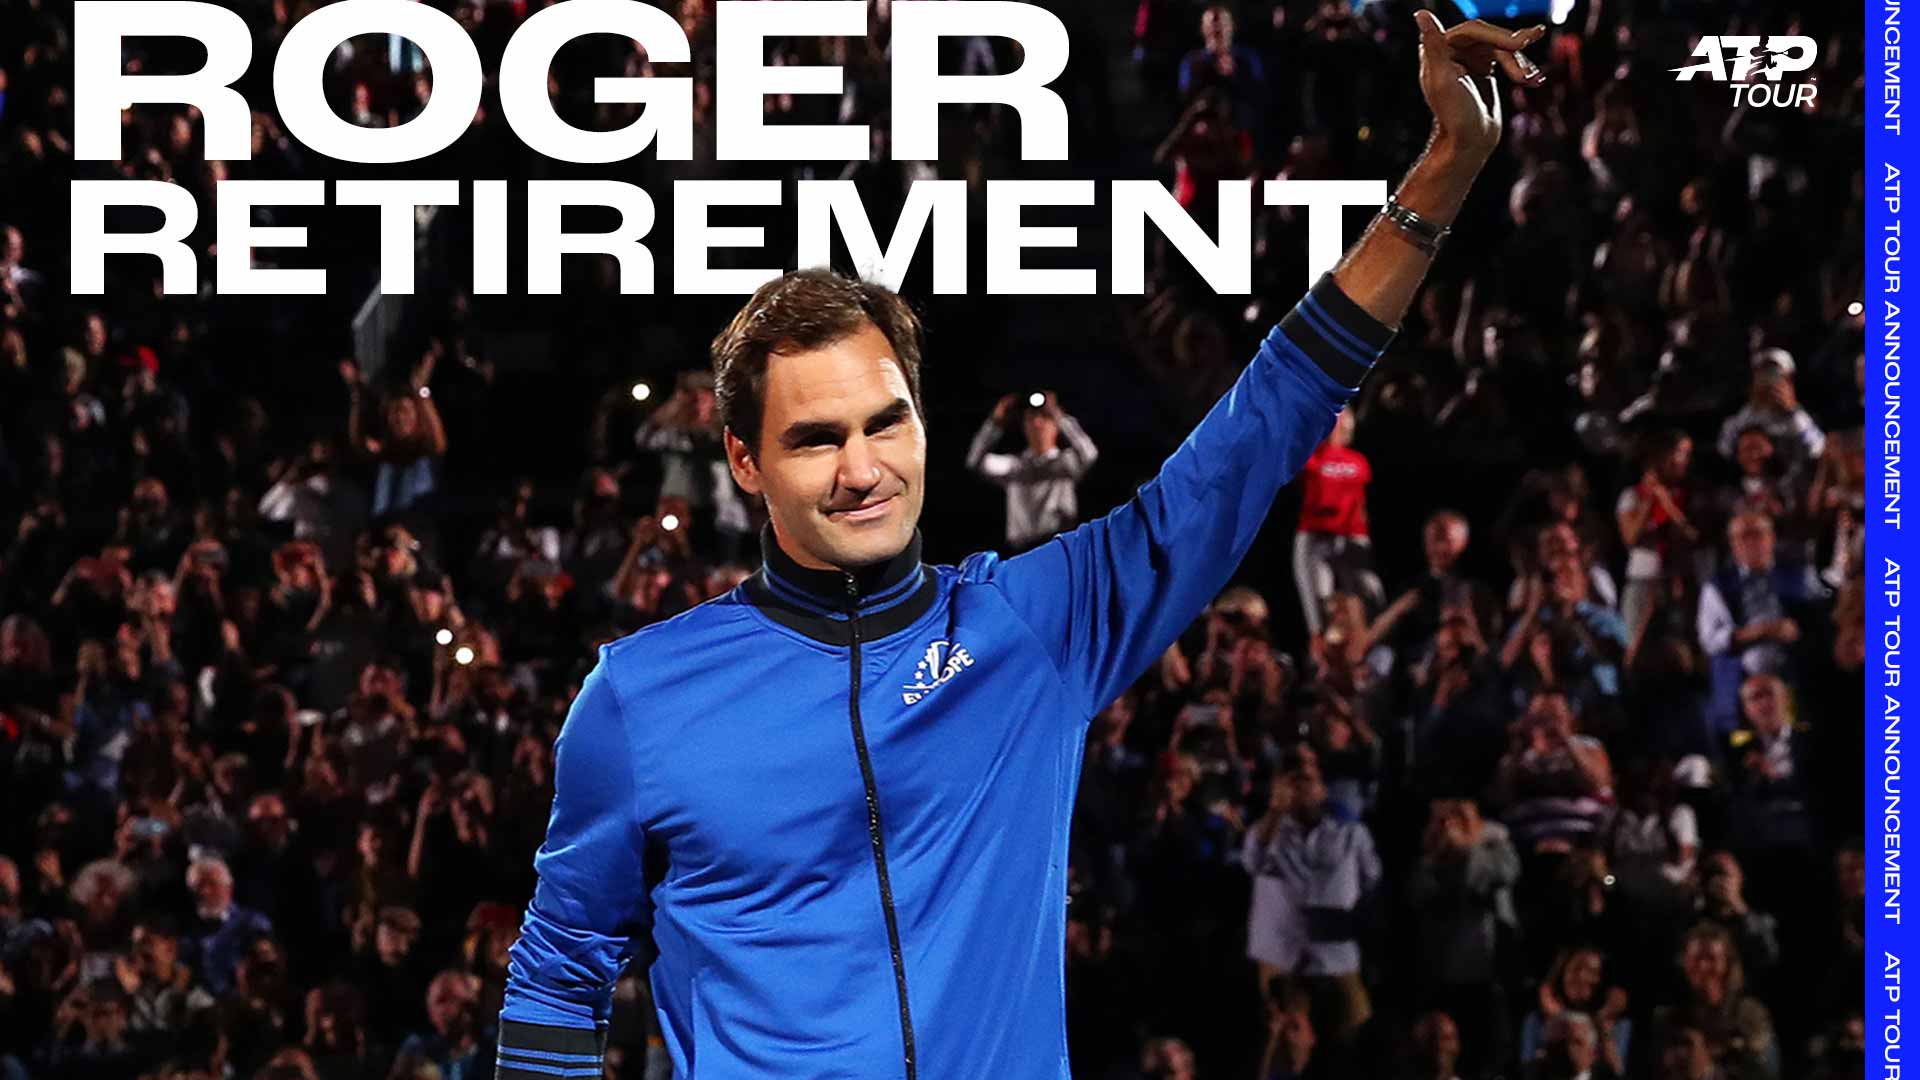 Roger Federer announces his retirement from professional tennis.